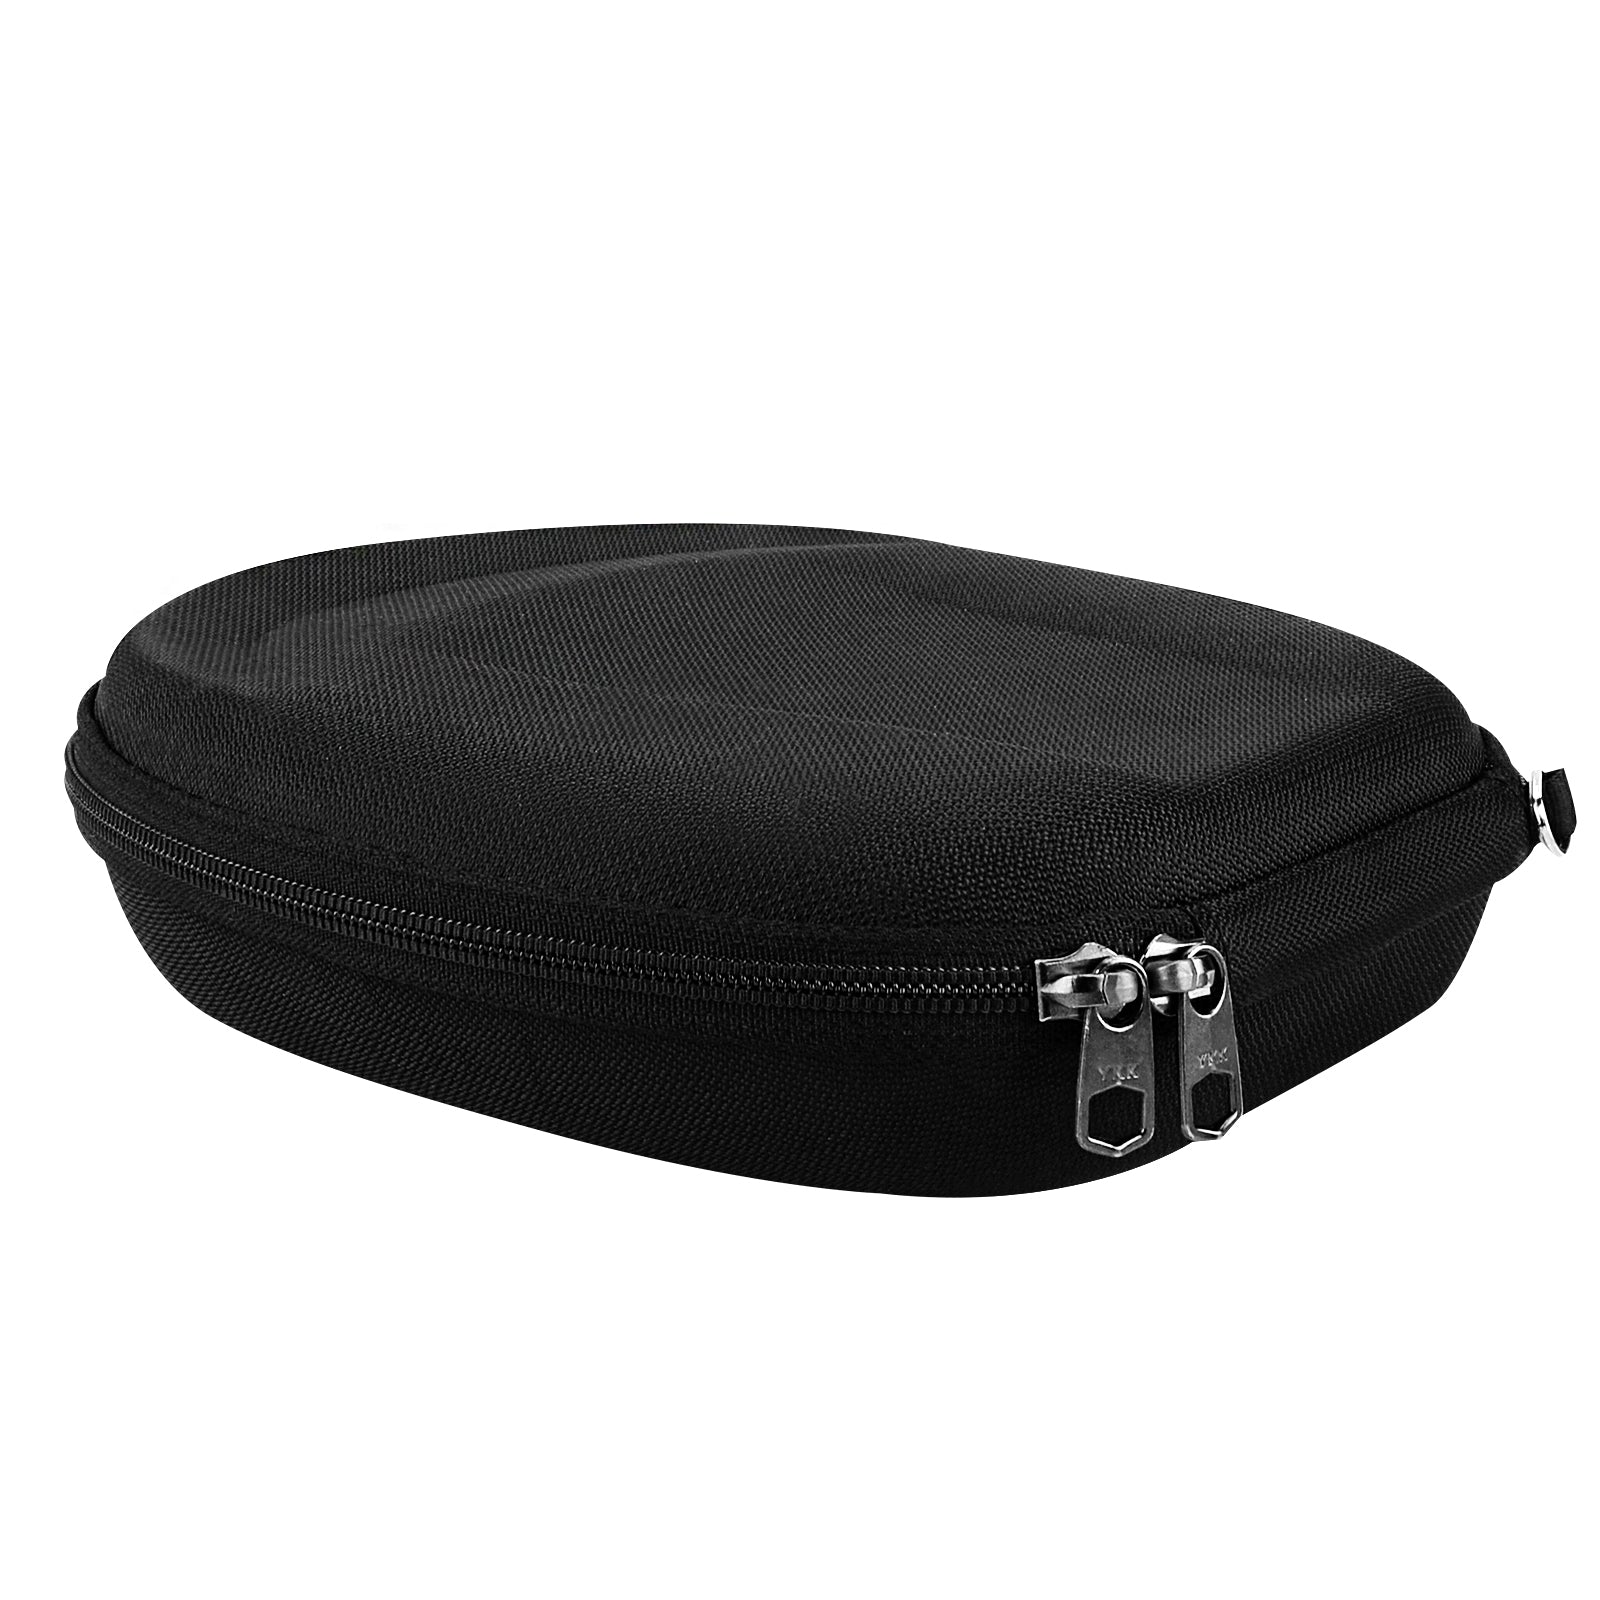 For SONY WH-CH720N WH-CH520 Wireless Headphone Bag Hard EVA Case